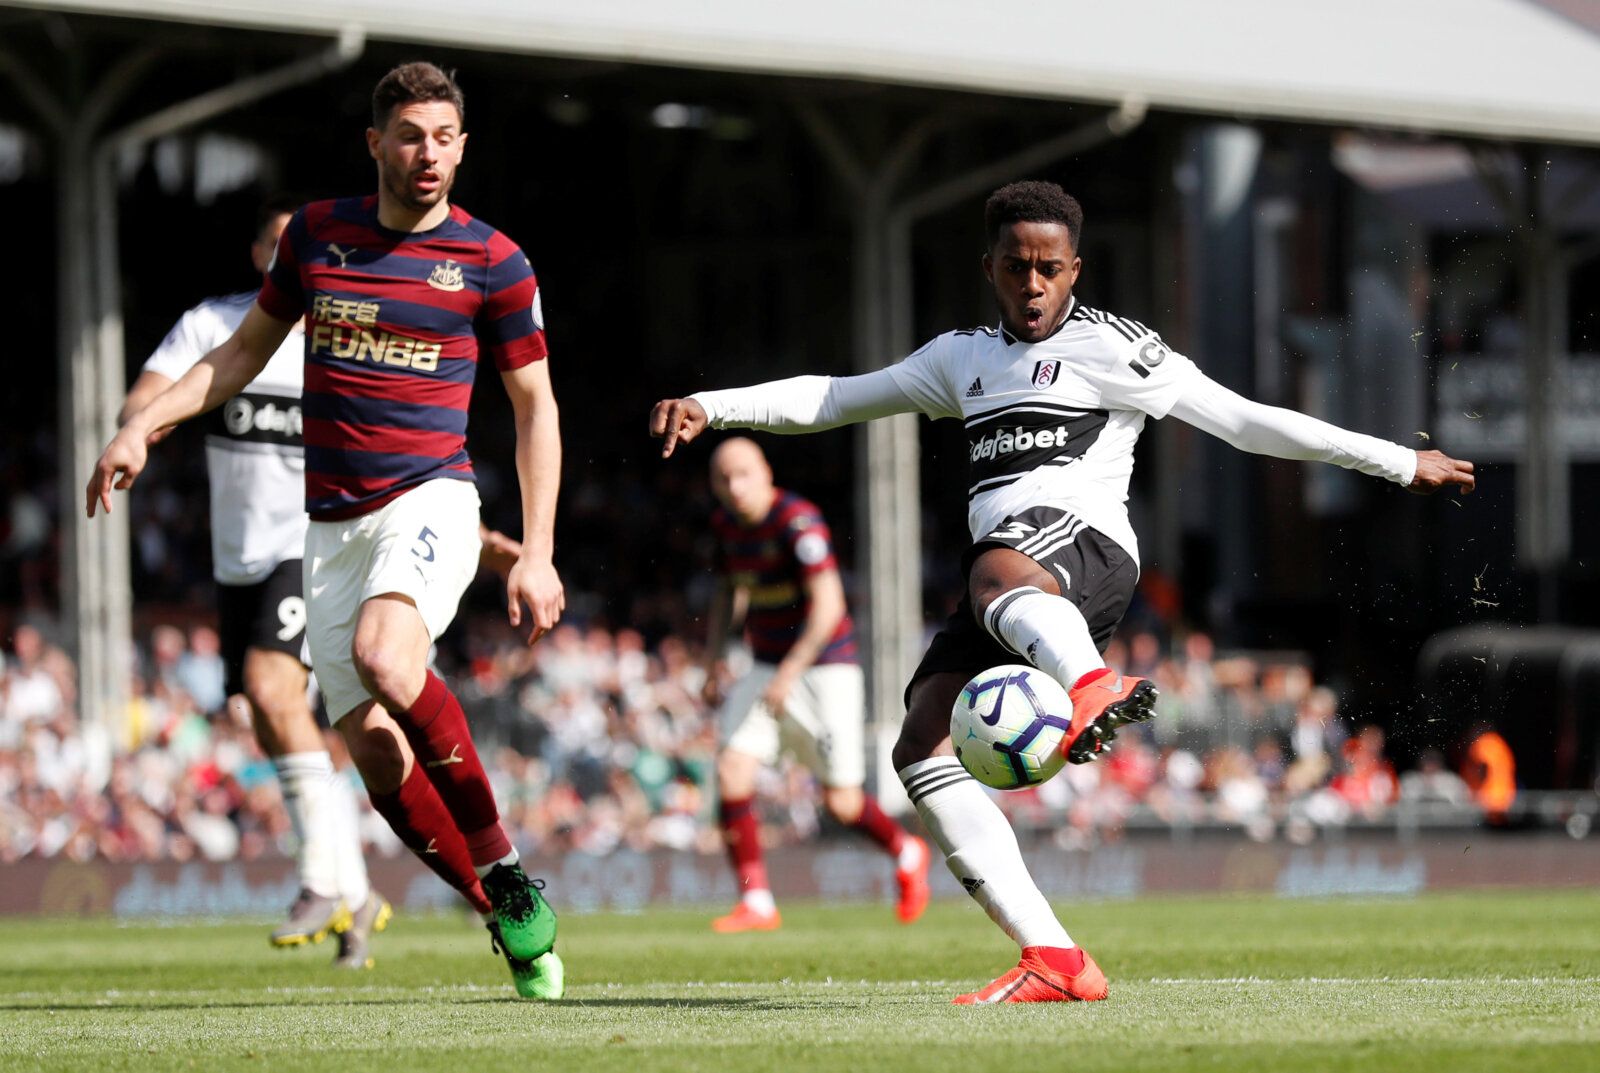 Soccer Football - Premier League - Fulham v Newcastle United - Craven Cottage, London, Britain - May 12, 2019  Fulham's Ryan Sessegnon shoots at goal as Newcastle United's Fabian Schar looks on  Action Images via Reuters/Peter Cziborra  EDITORIAL USE ONLY. No use with unauthorized audio, video, data, fixture lists, club/league logos or 